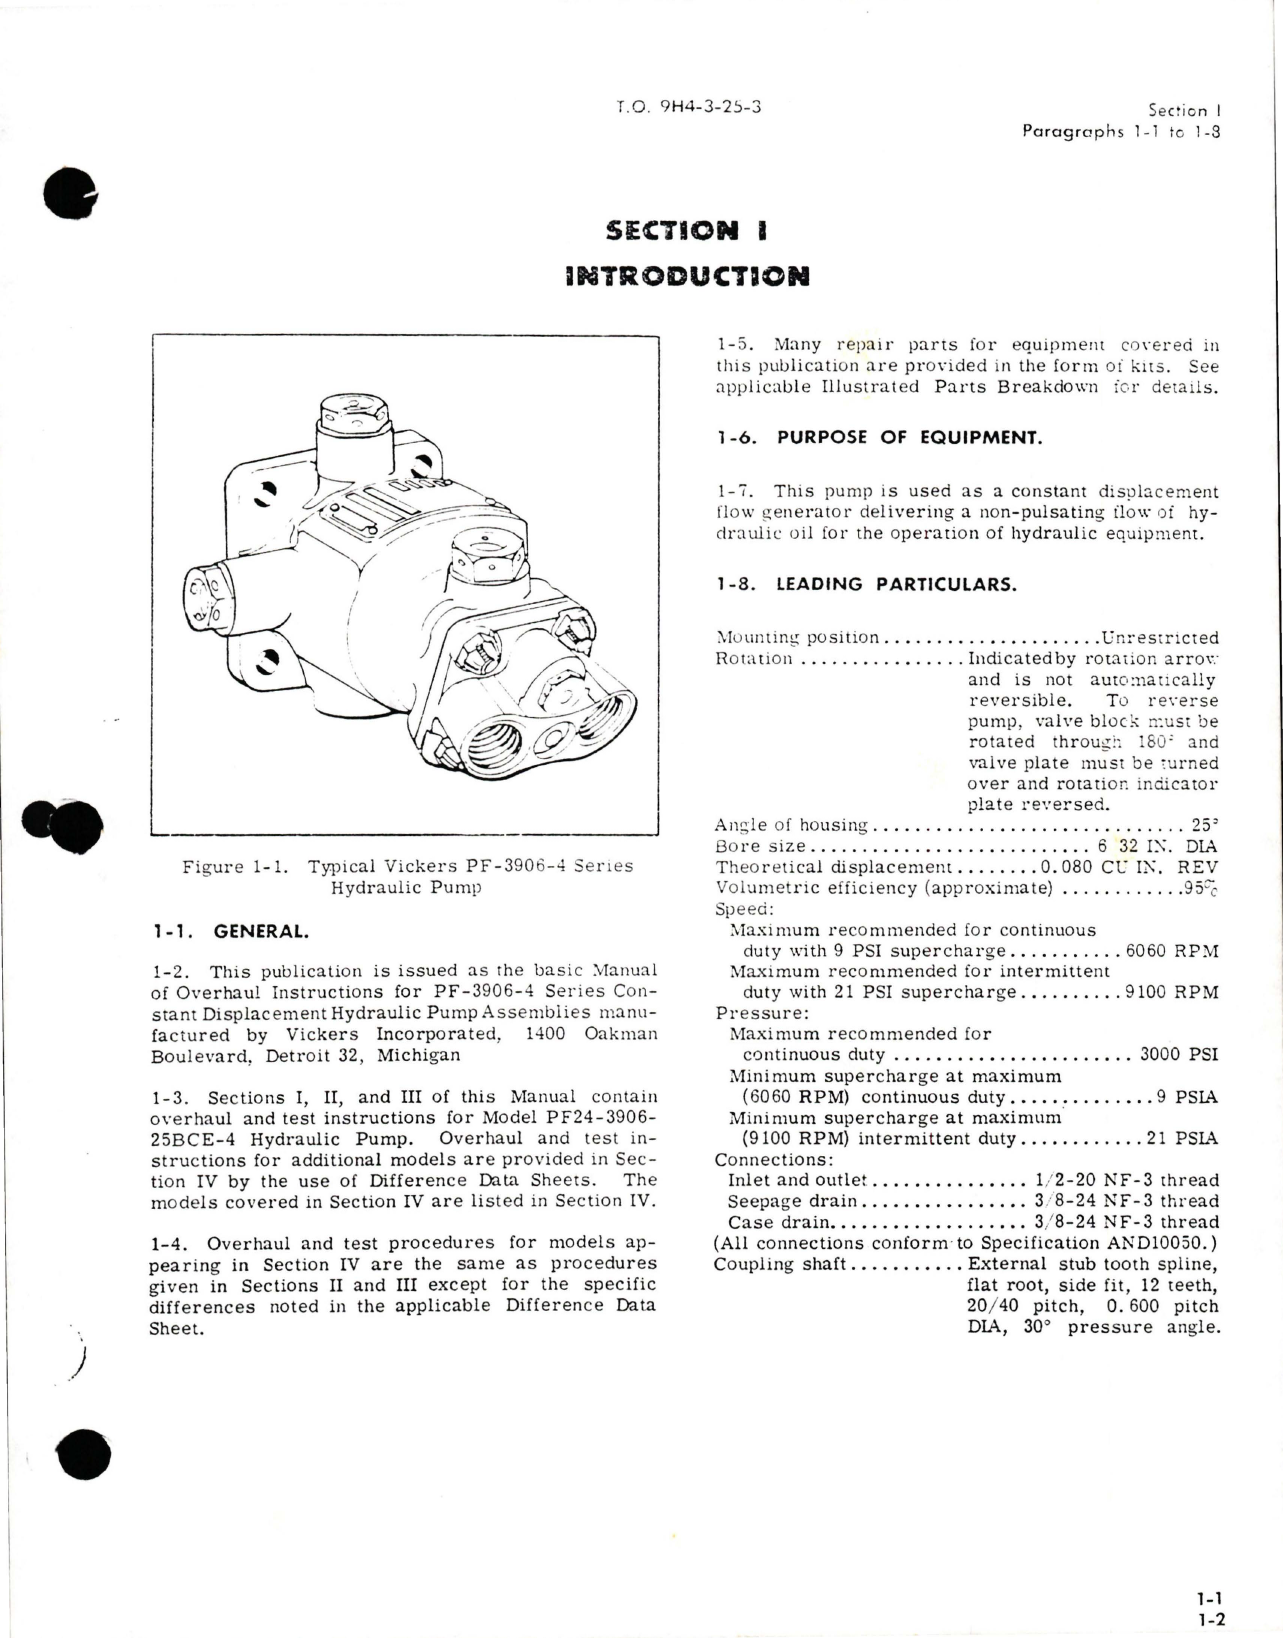 Sample page 5 from AirCorps Library document: Overhaul for Hydraulic Pump Assembly - PF-3906-4 Series 